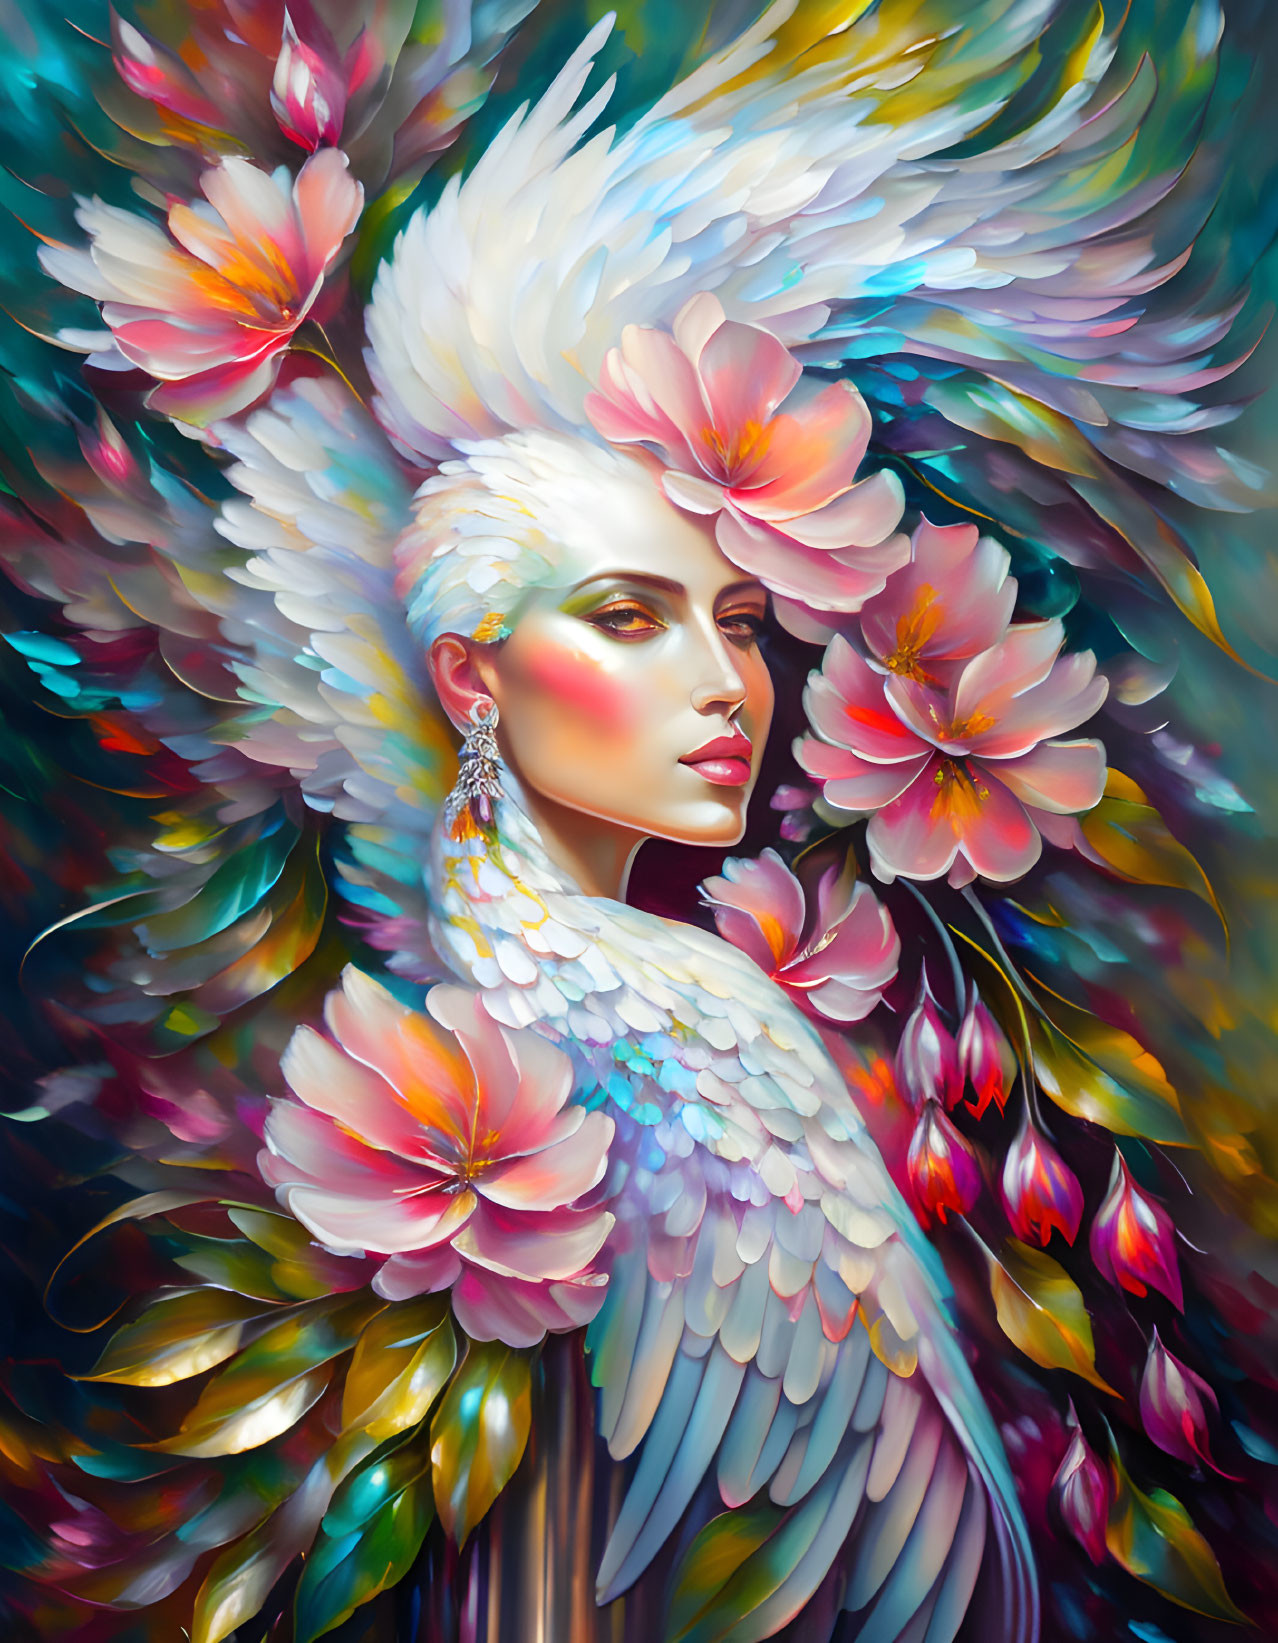 Colorful artwork of woman with bird-like features in floral setting